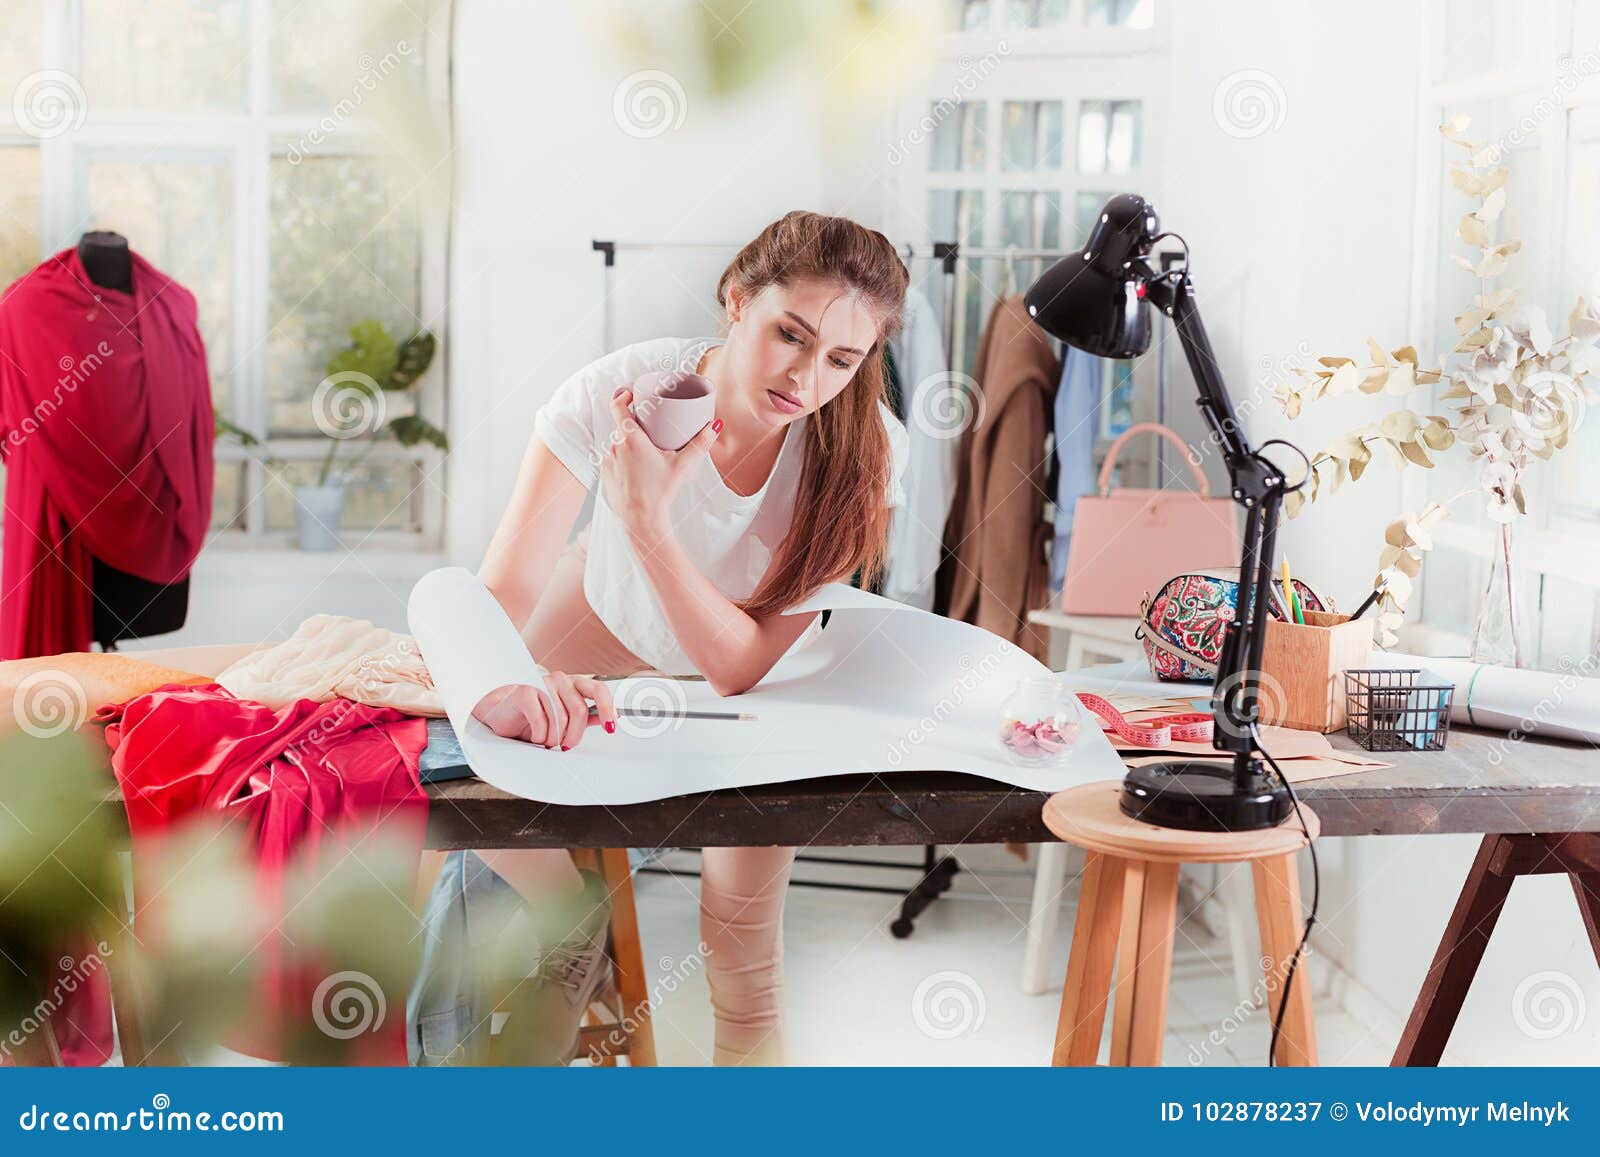 Fashion Designers Working in Studio Sitting on the Desk Stock Image ...